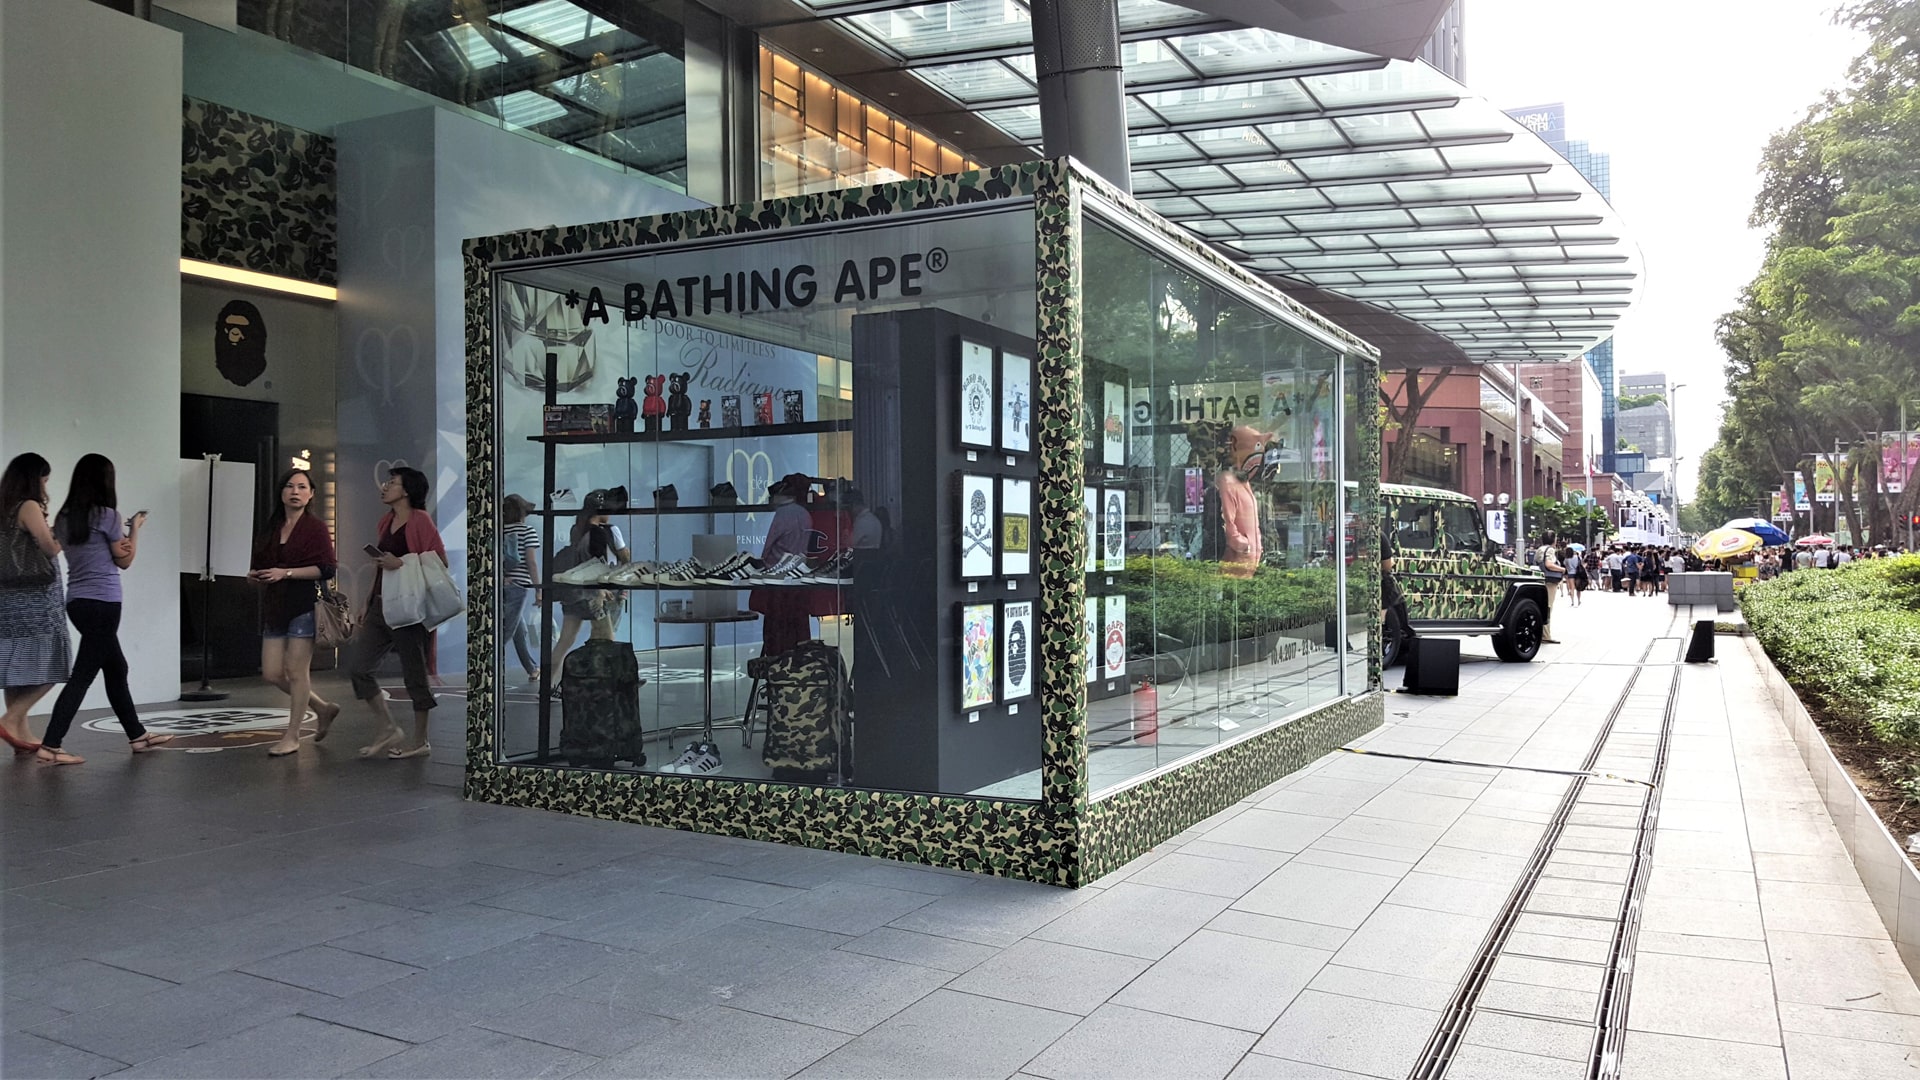 tsc_opt-images_tubelar-system_a-bathing-ape-popup-store-1920x1080-04-min